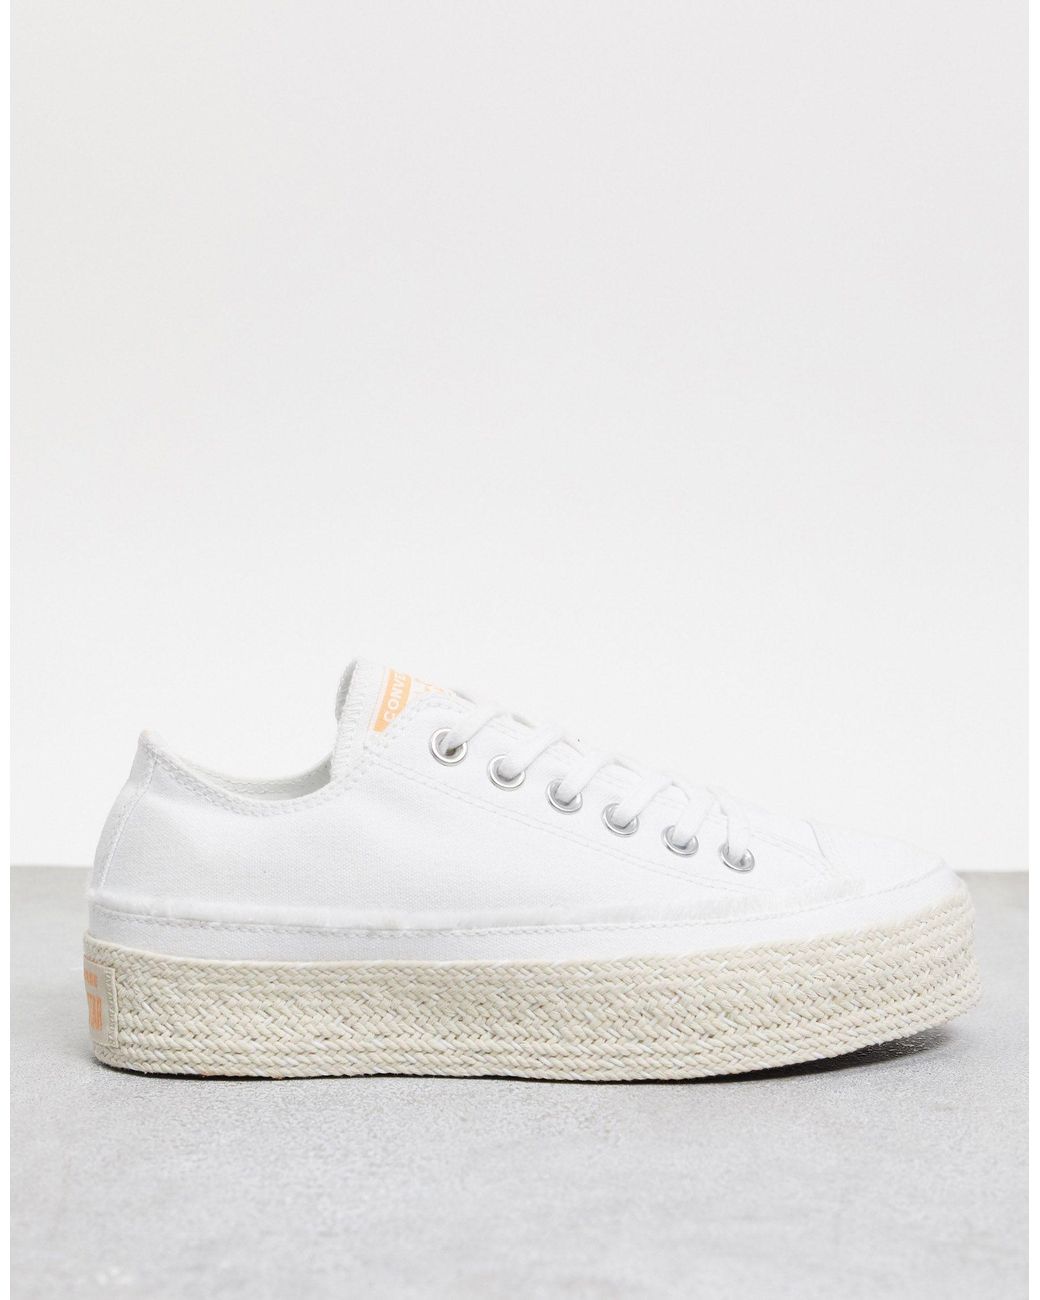 Converse Chuck Taylor All Star Ox Lift Espadrille Sneakers in White | Lyst